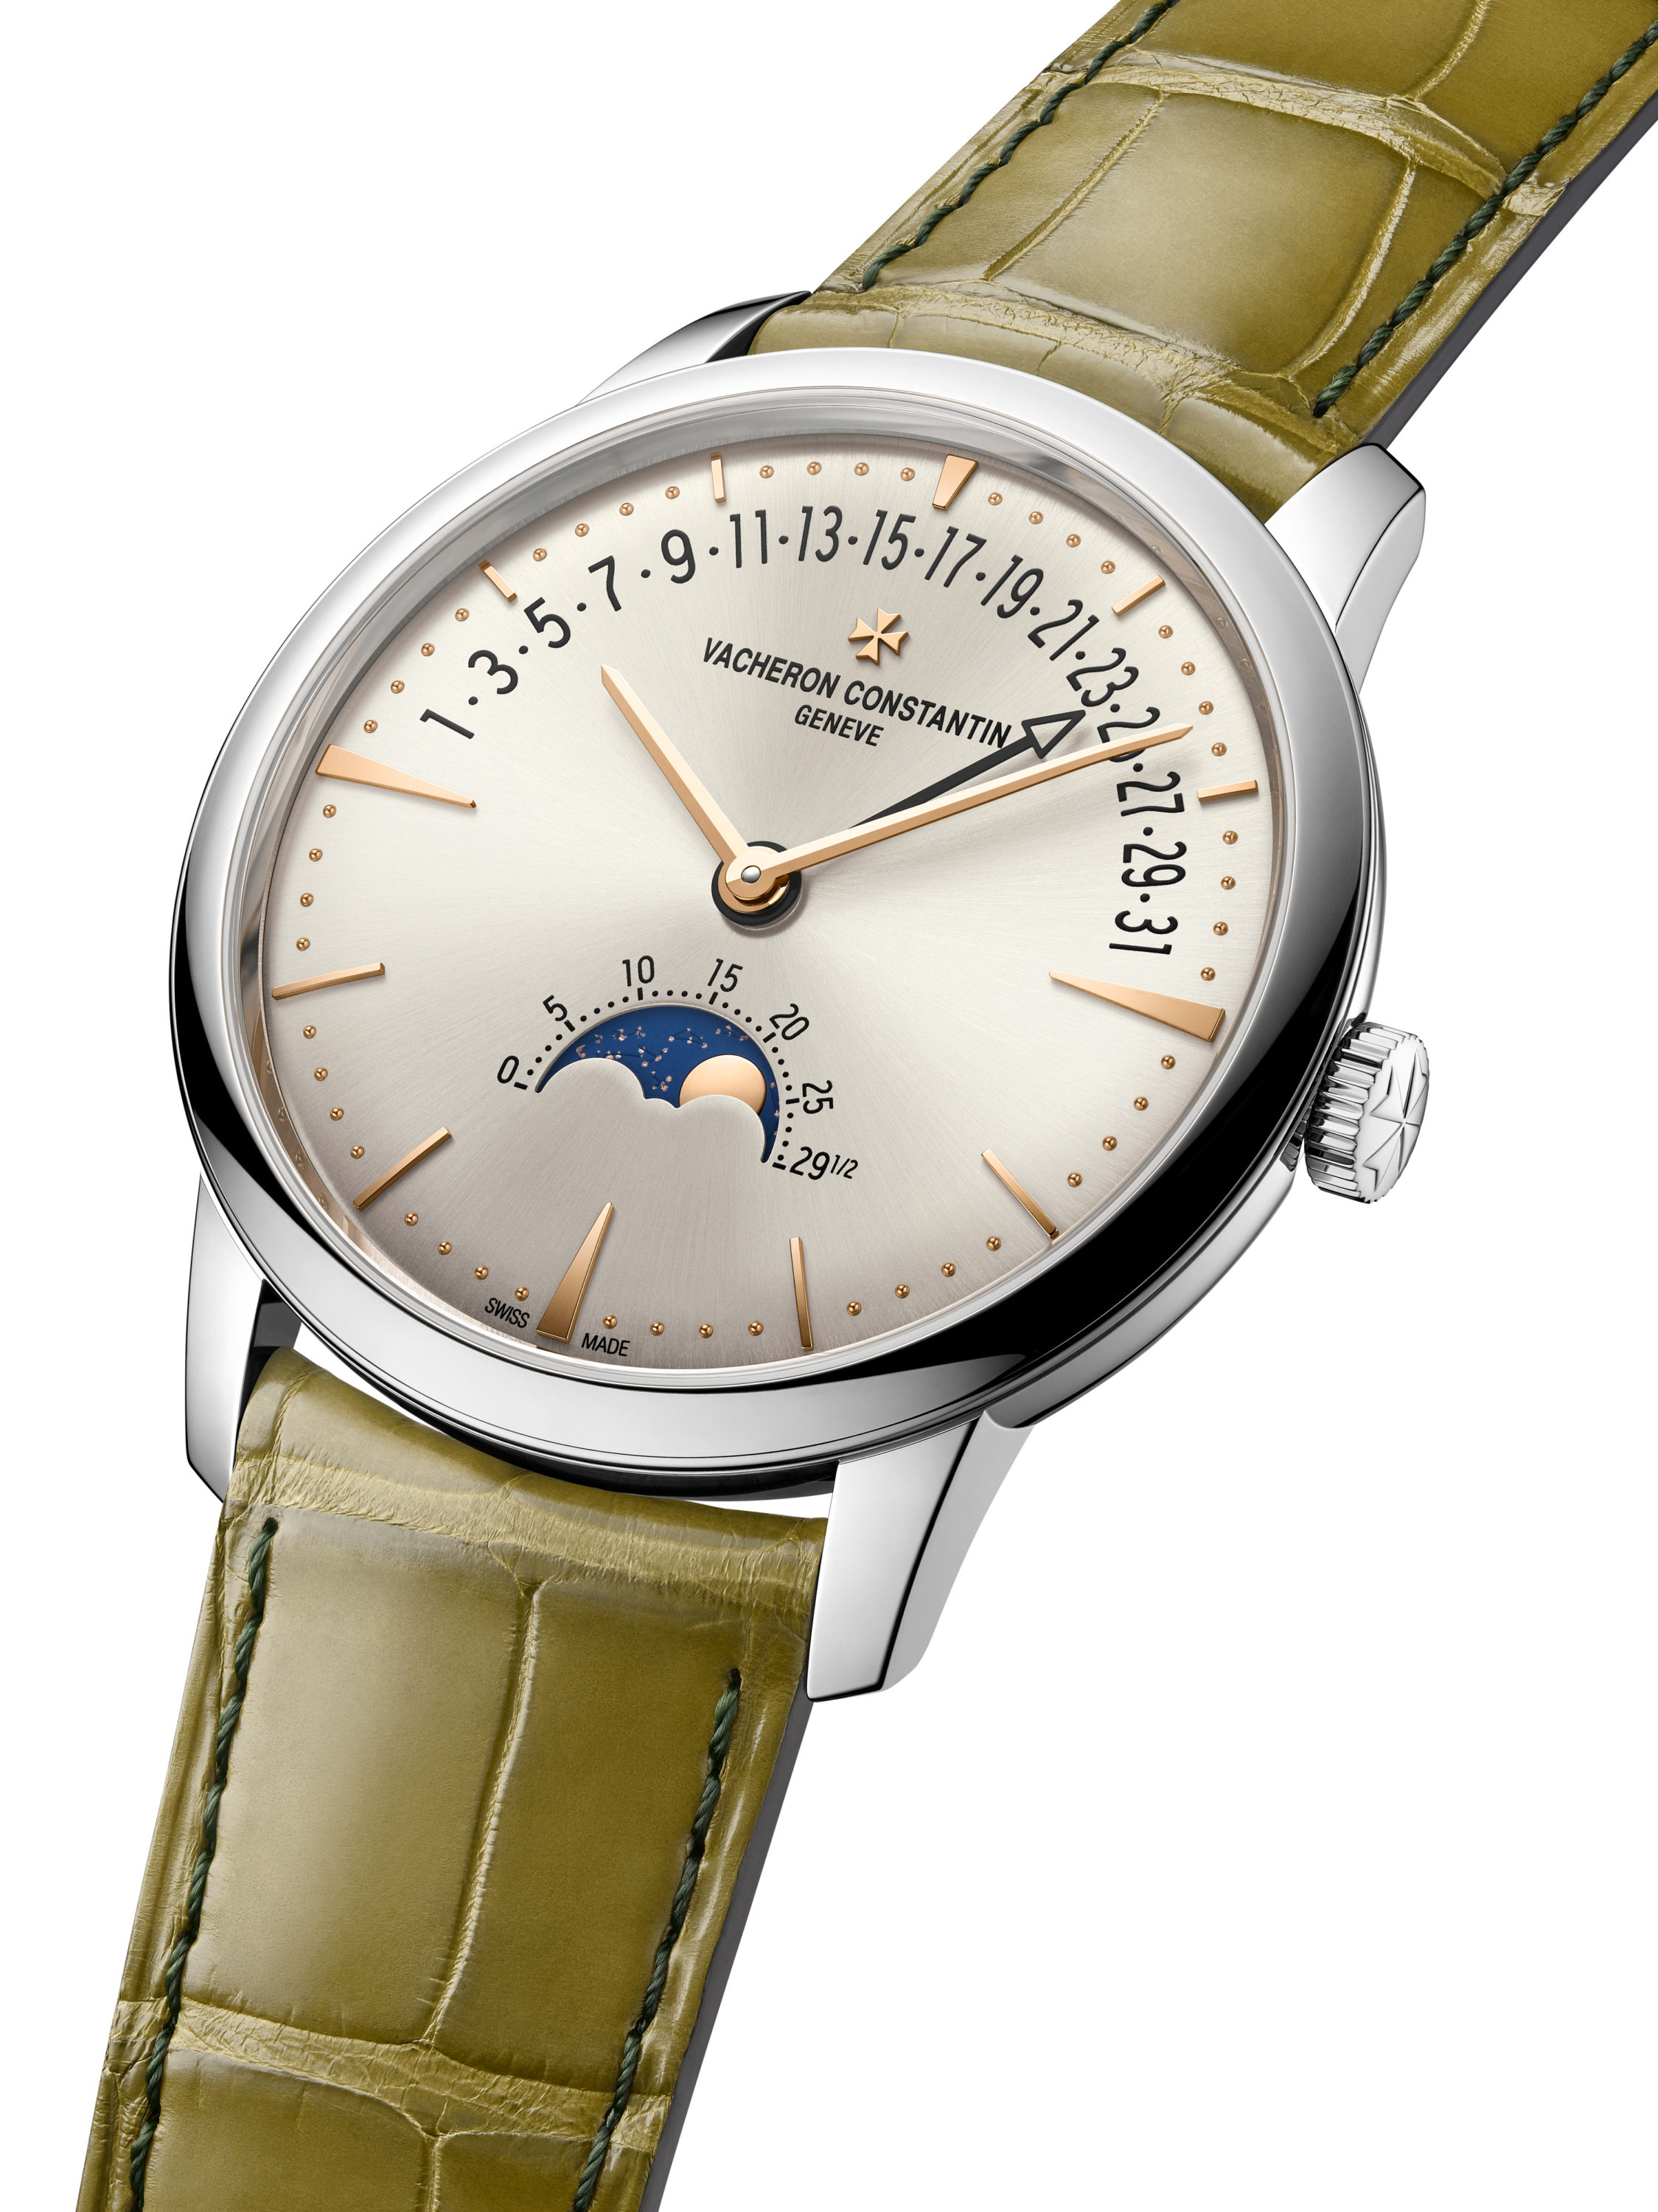 Watches and Wonders 2024: Celebrating the 20th Anniversary of the Vacheron Constantin Patrimony